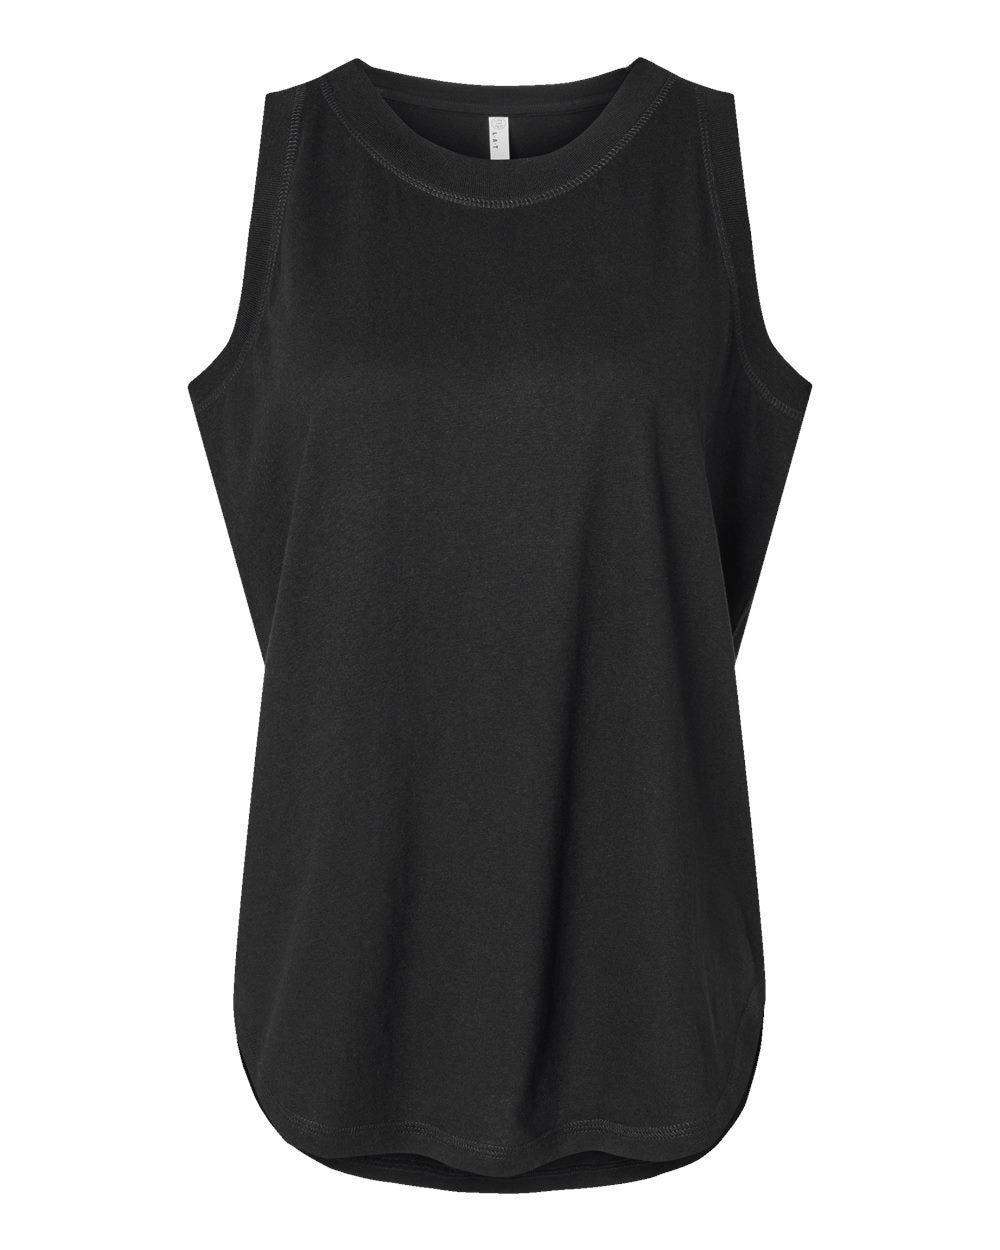 Best Mom In The World Color Premium Relaxed Fit Tank